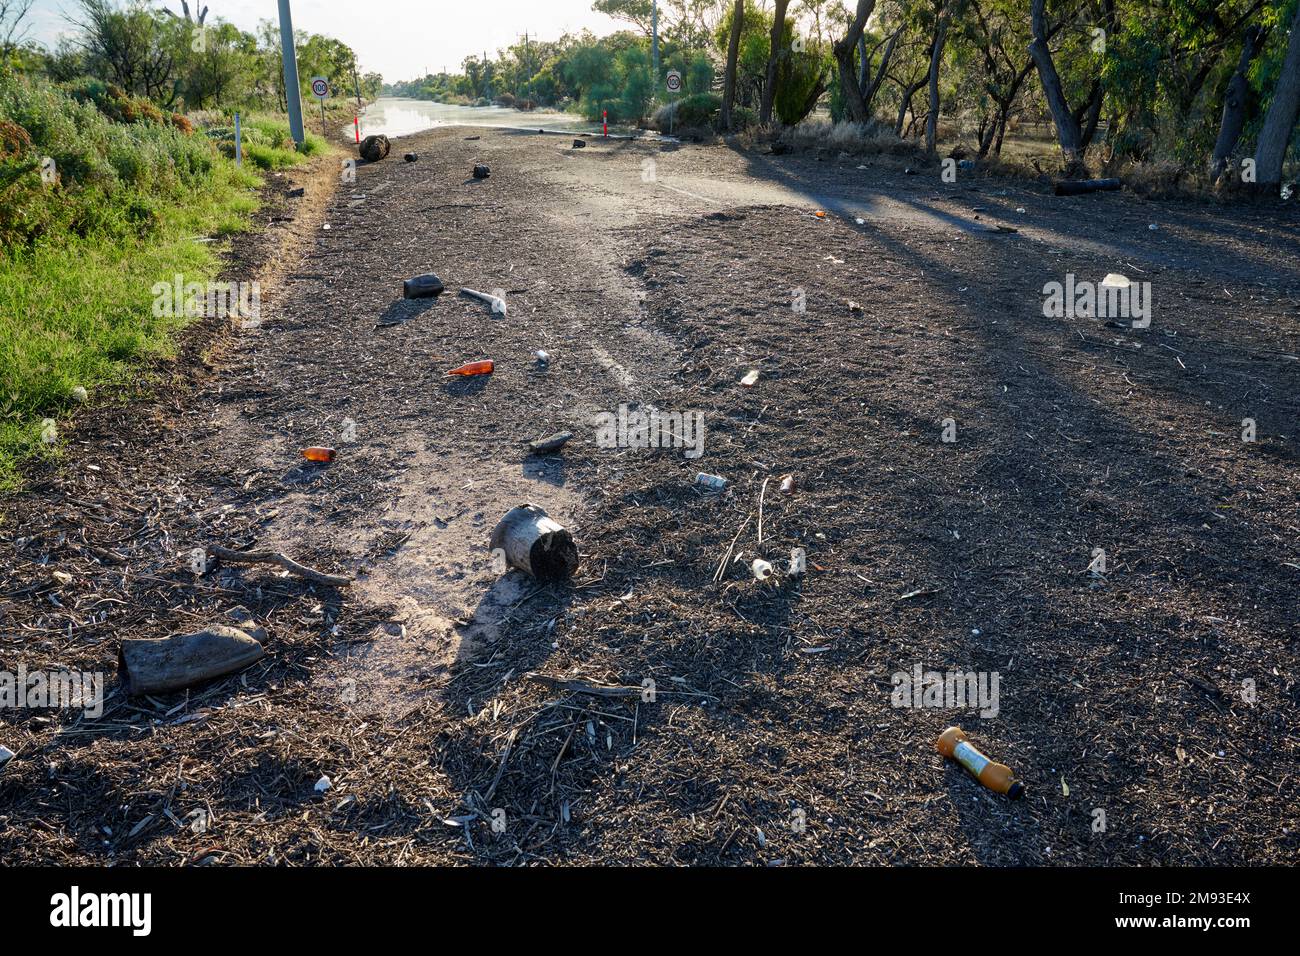 Rubbish and organic material covers the road surface as floodwaters receed on Ranfurly Way. A main connecting road betwen the towns of Mildura and Mer Stock Photo